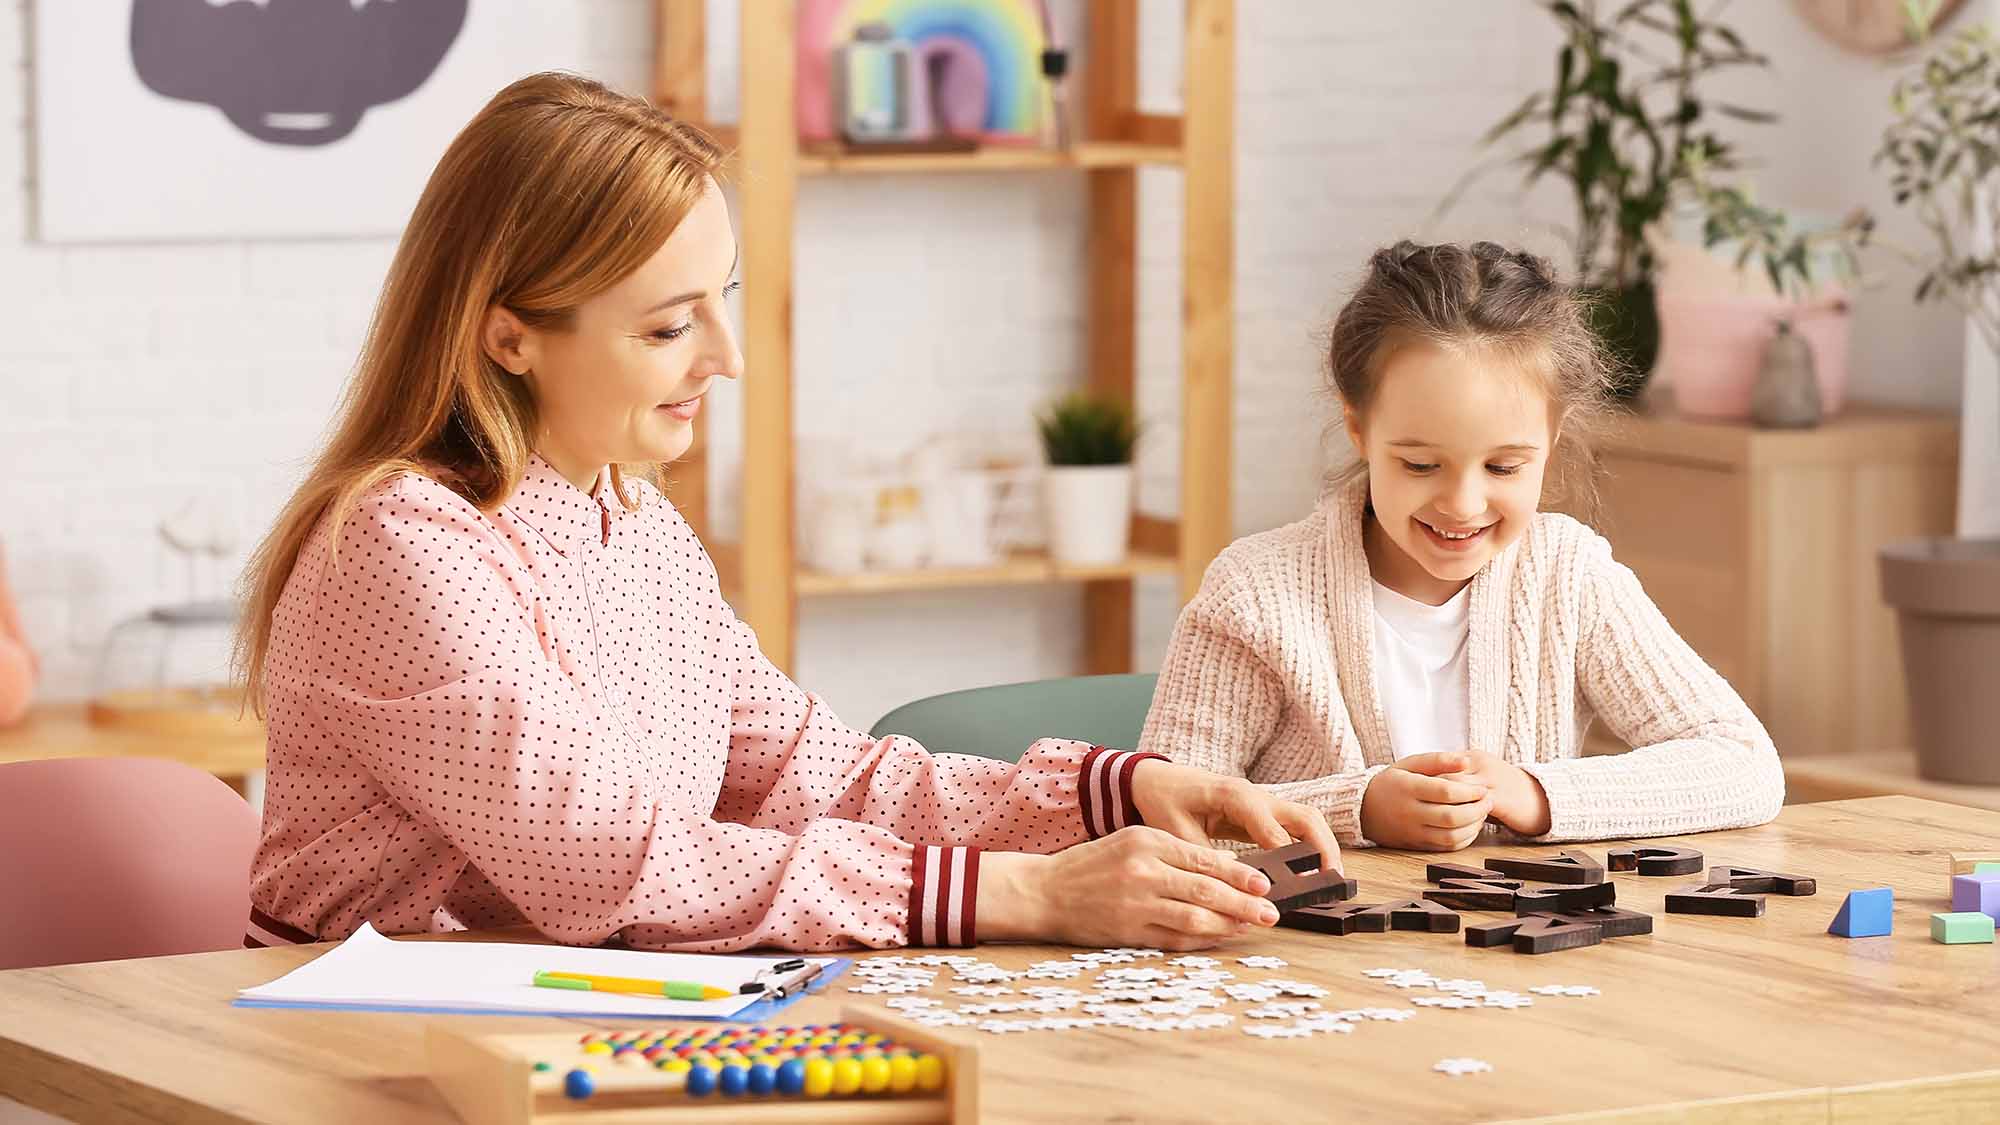 Behavioral therapist working a puzzle with a smiling child